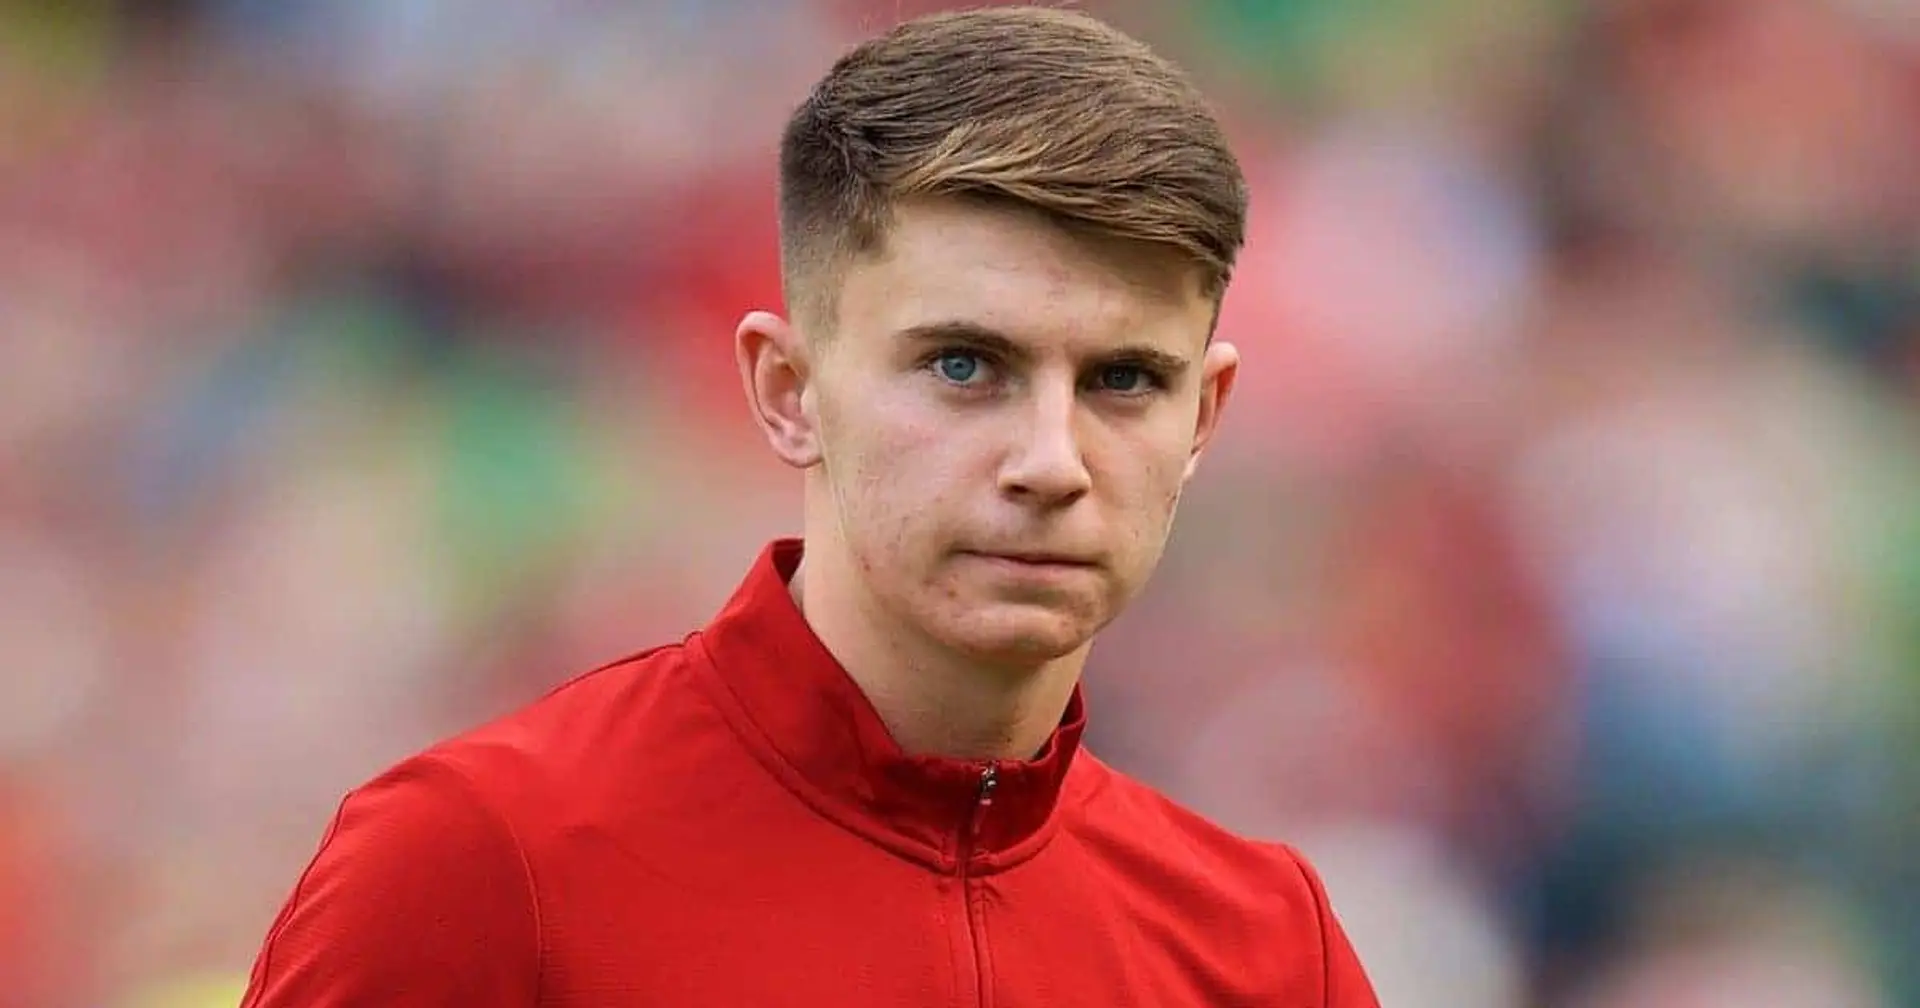 Liverpool 'receive number of approaches' for Ben Woodburn as they look to arrange another loan spell